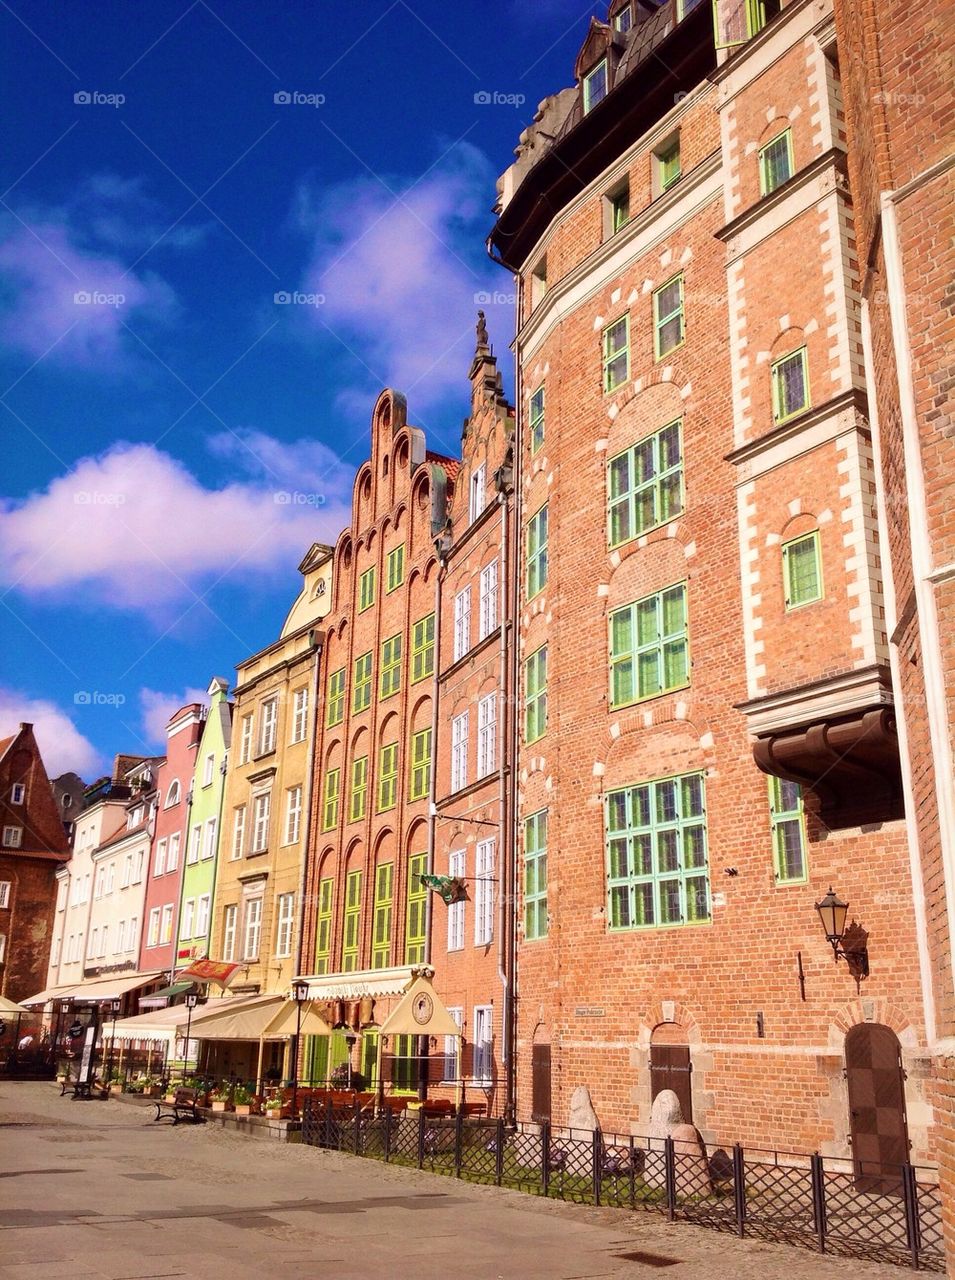 Colorful houses in Gdansk